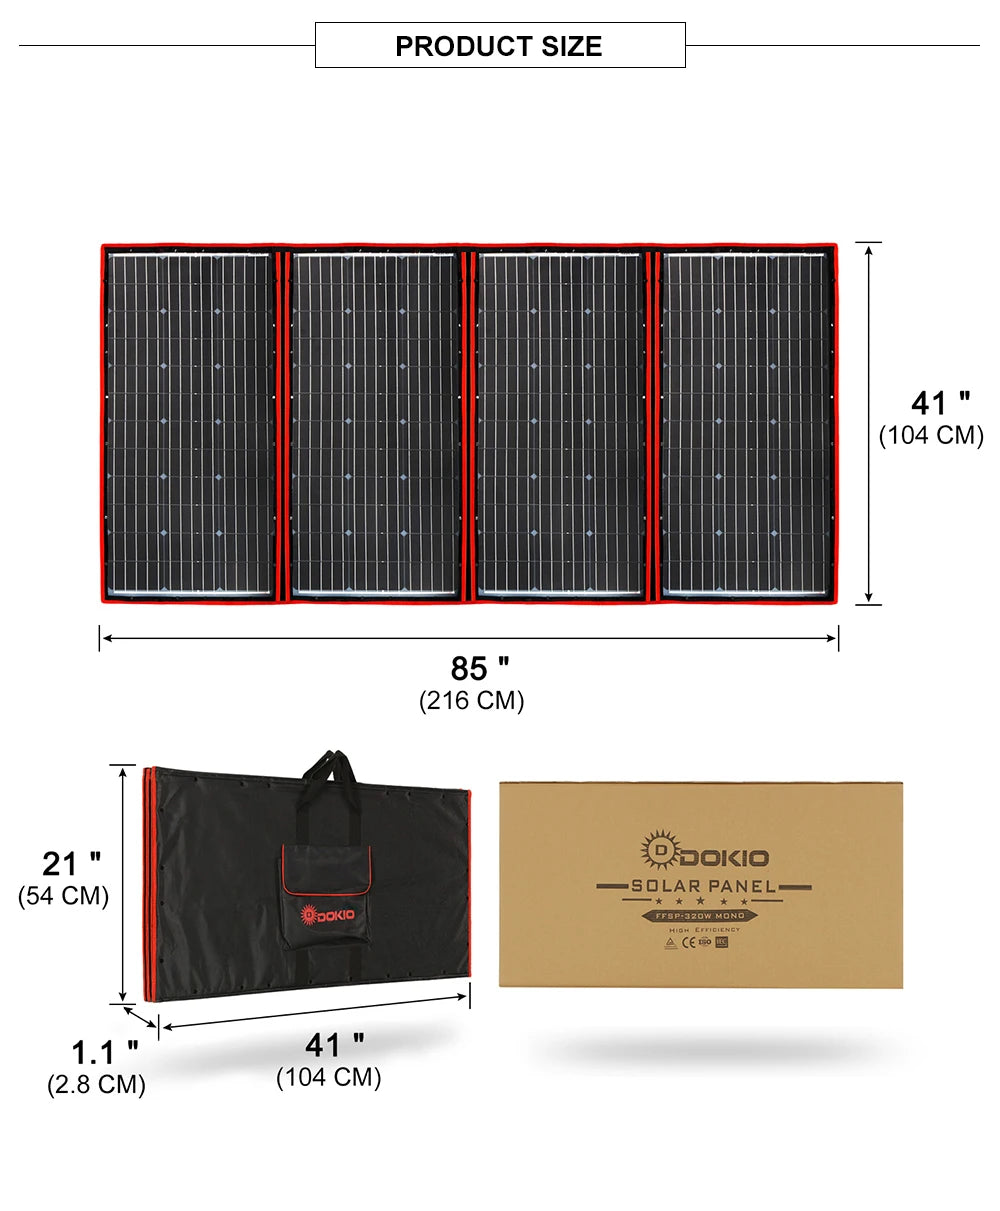 Dokio Flexible Foldable Solar Panel, Compact foldable solar panel with monocrystalline silicon and waterproof features.